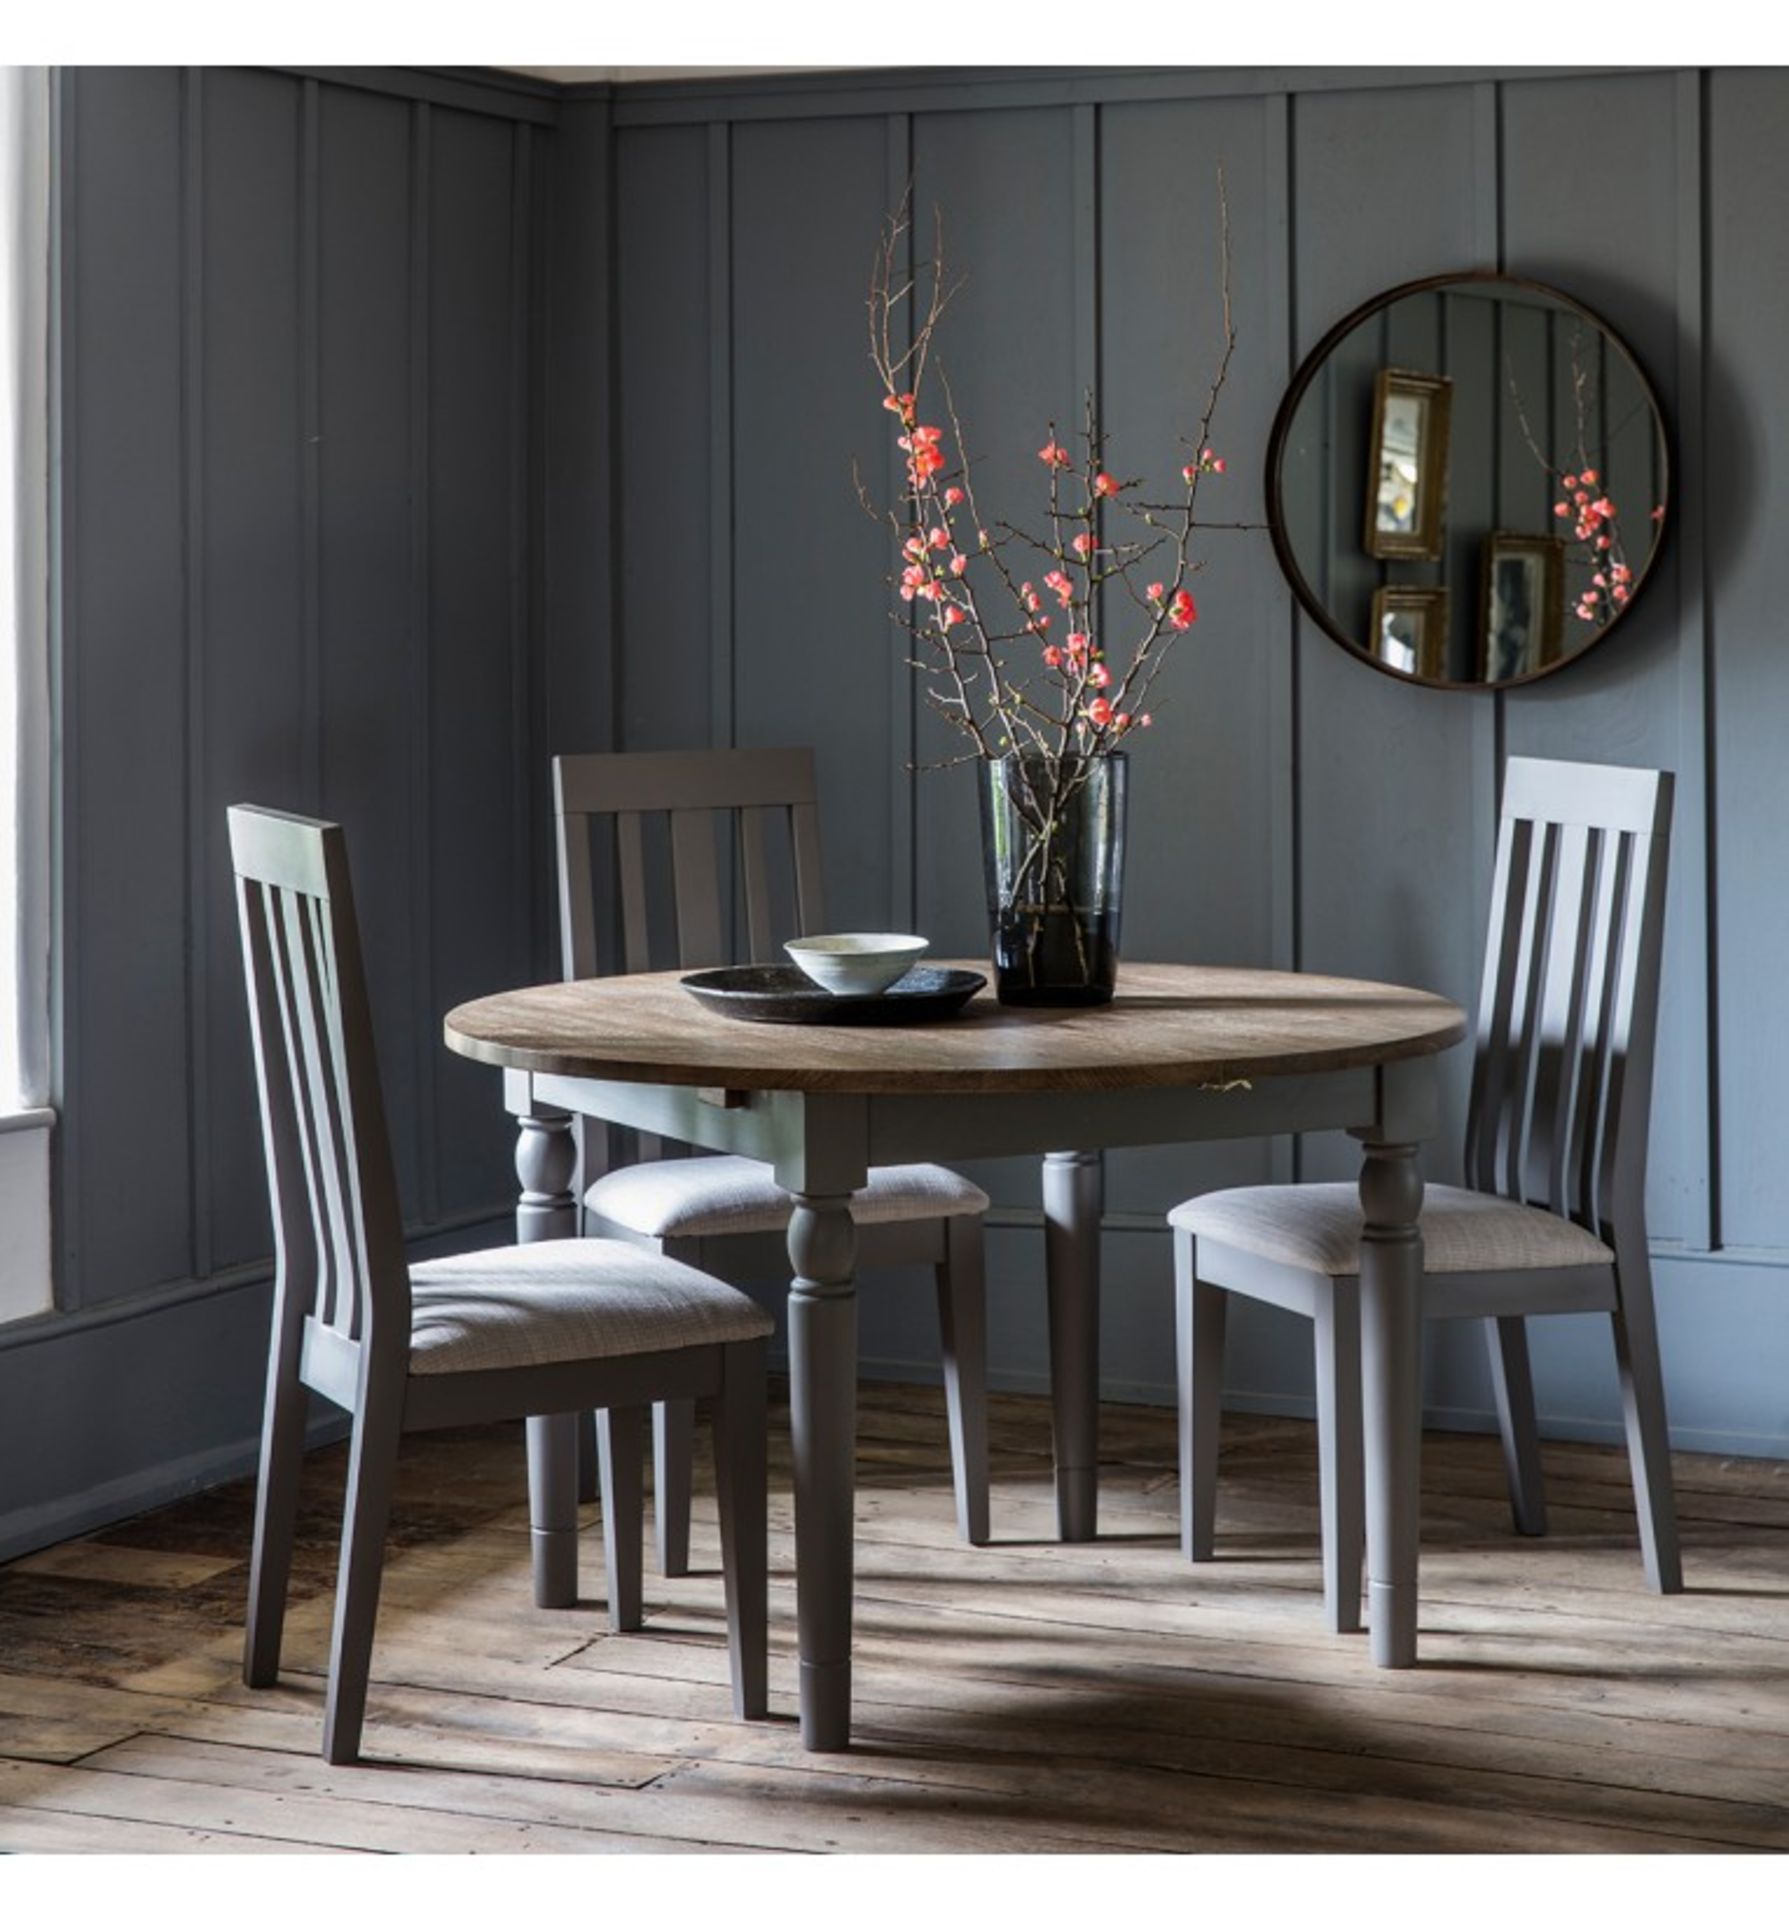 Cookham Round Extending Dining Table Grey A Butterfly Leaf Table Extending To 1550mm, Seating Up